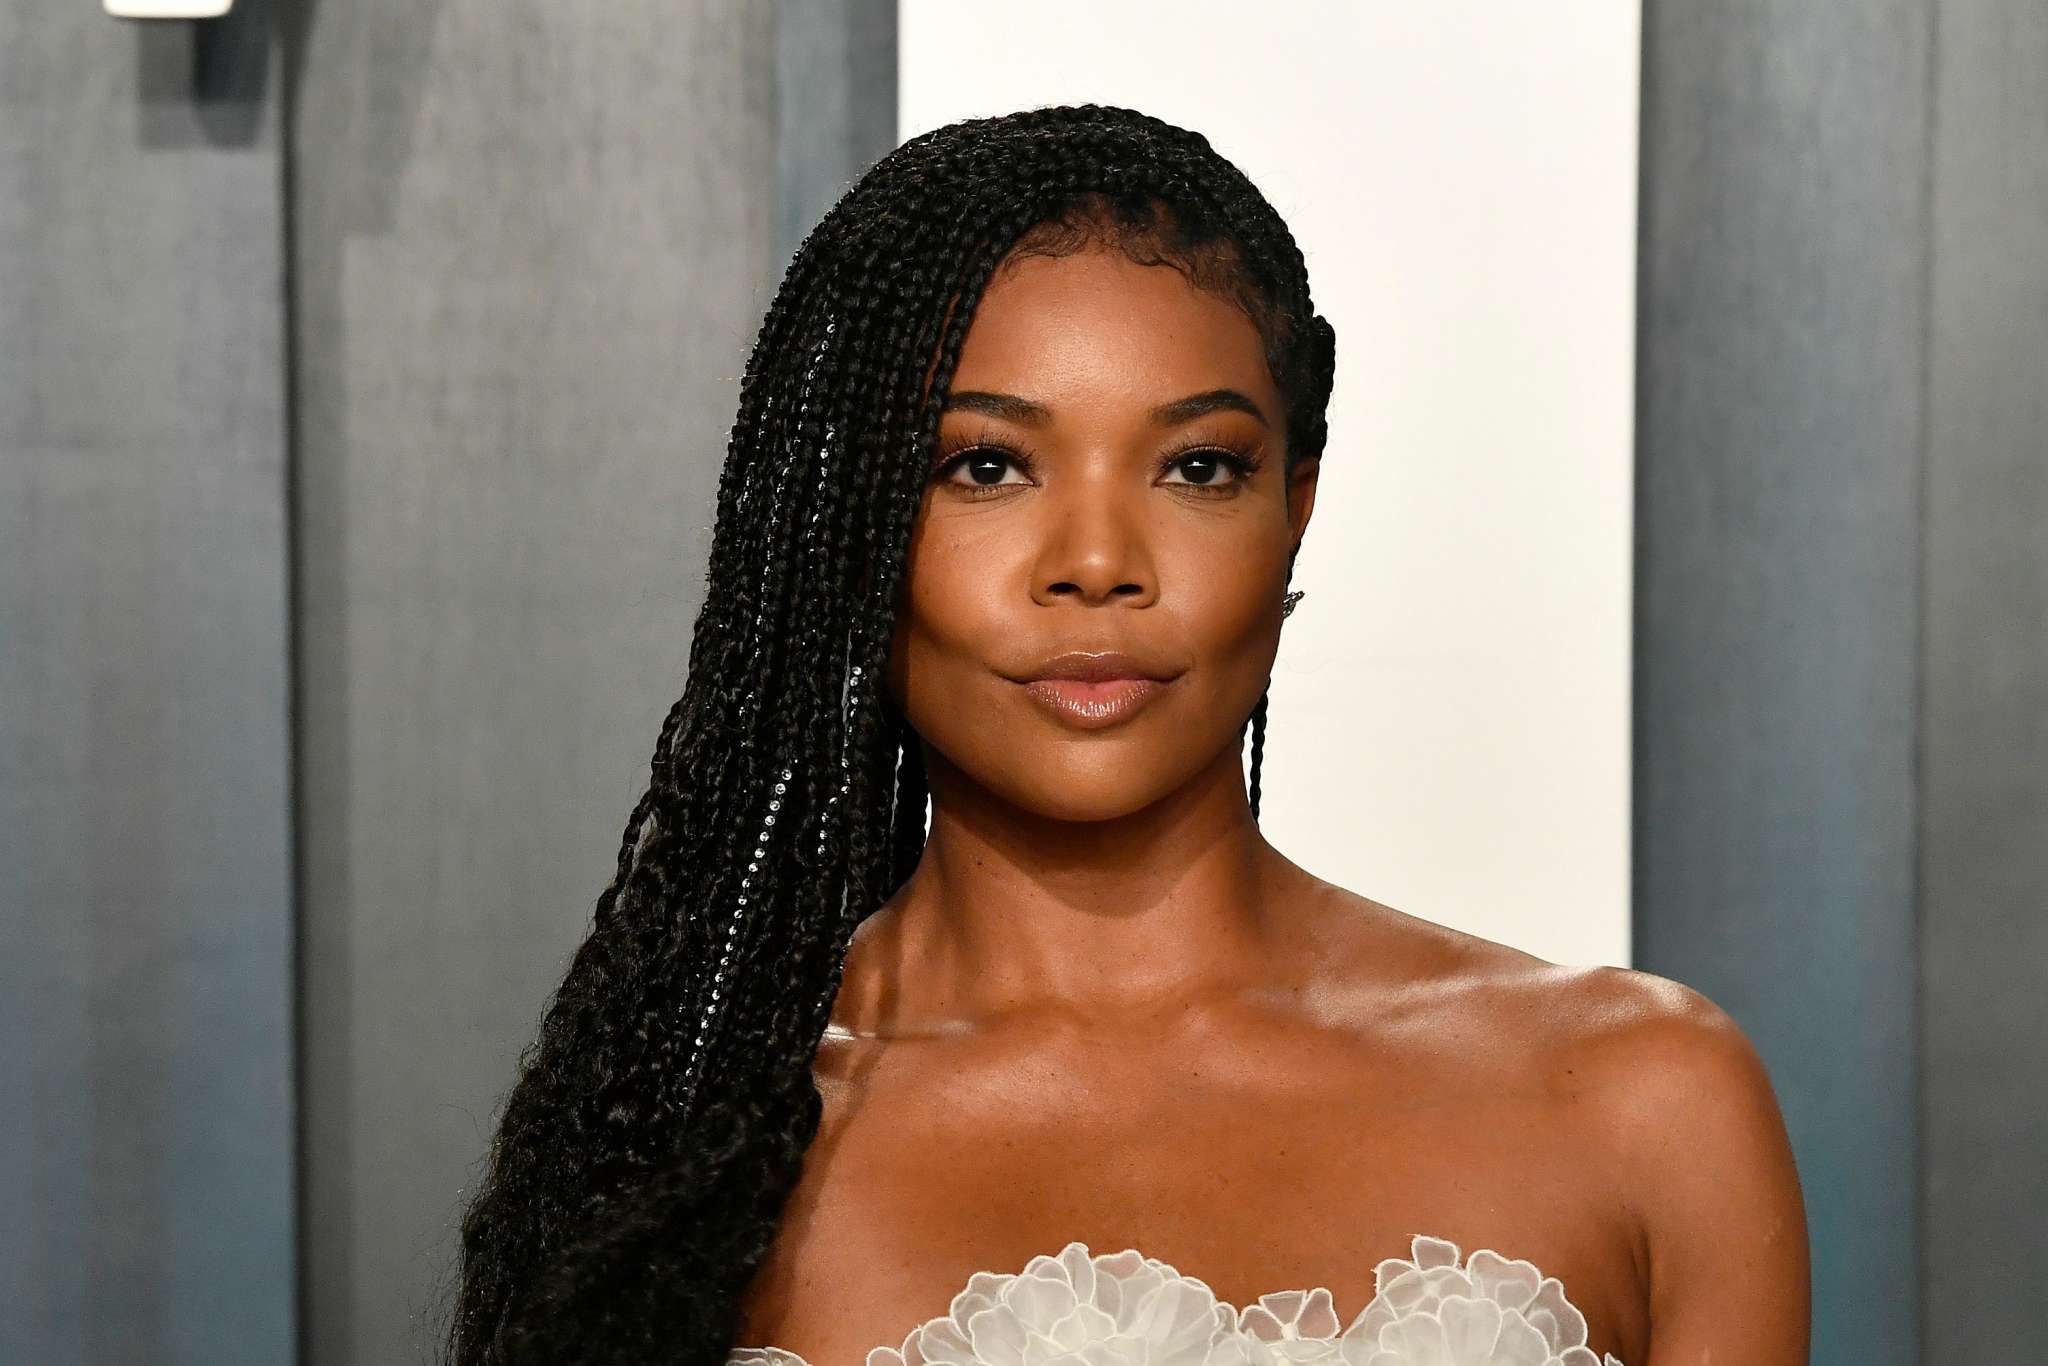 gabrielle-union-shares-an-amazing-workout-video-for-2022